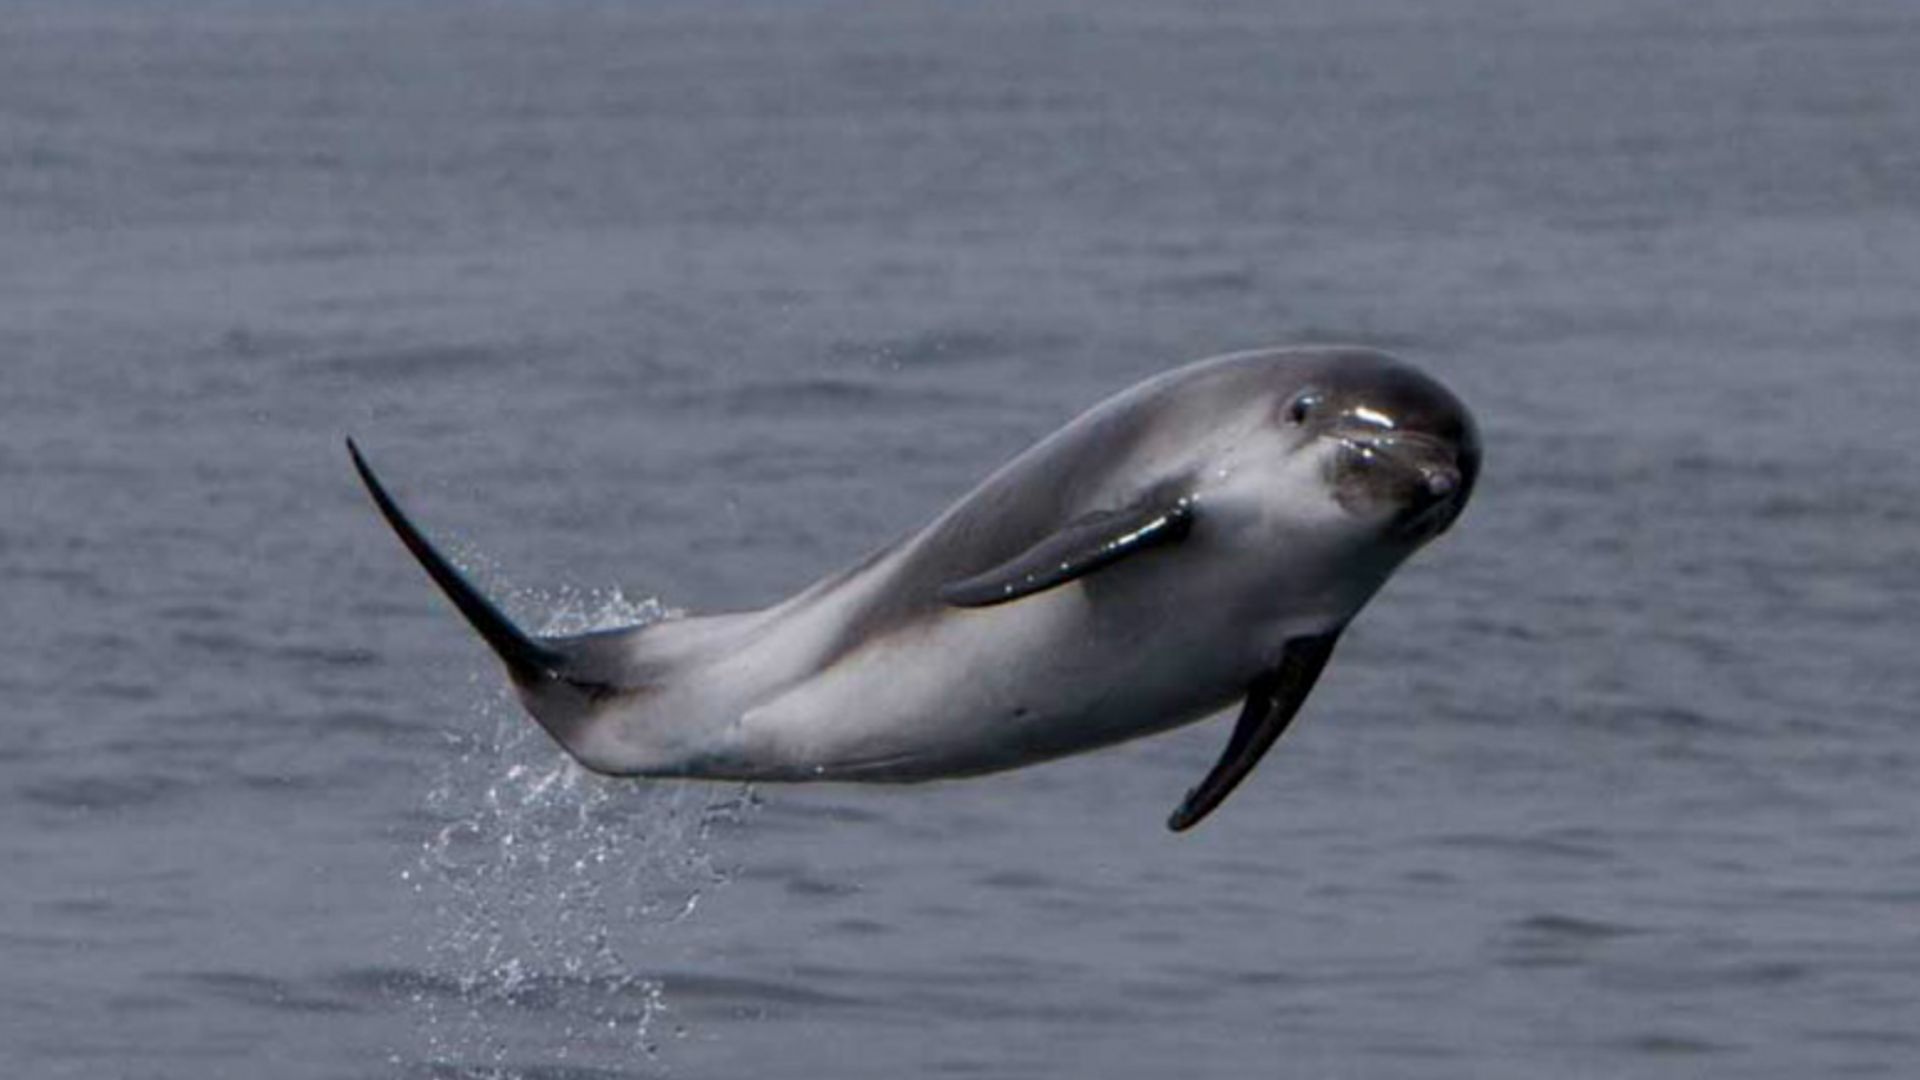 Jumping dolphin in Iceland